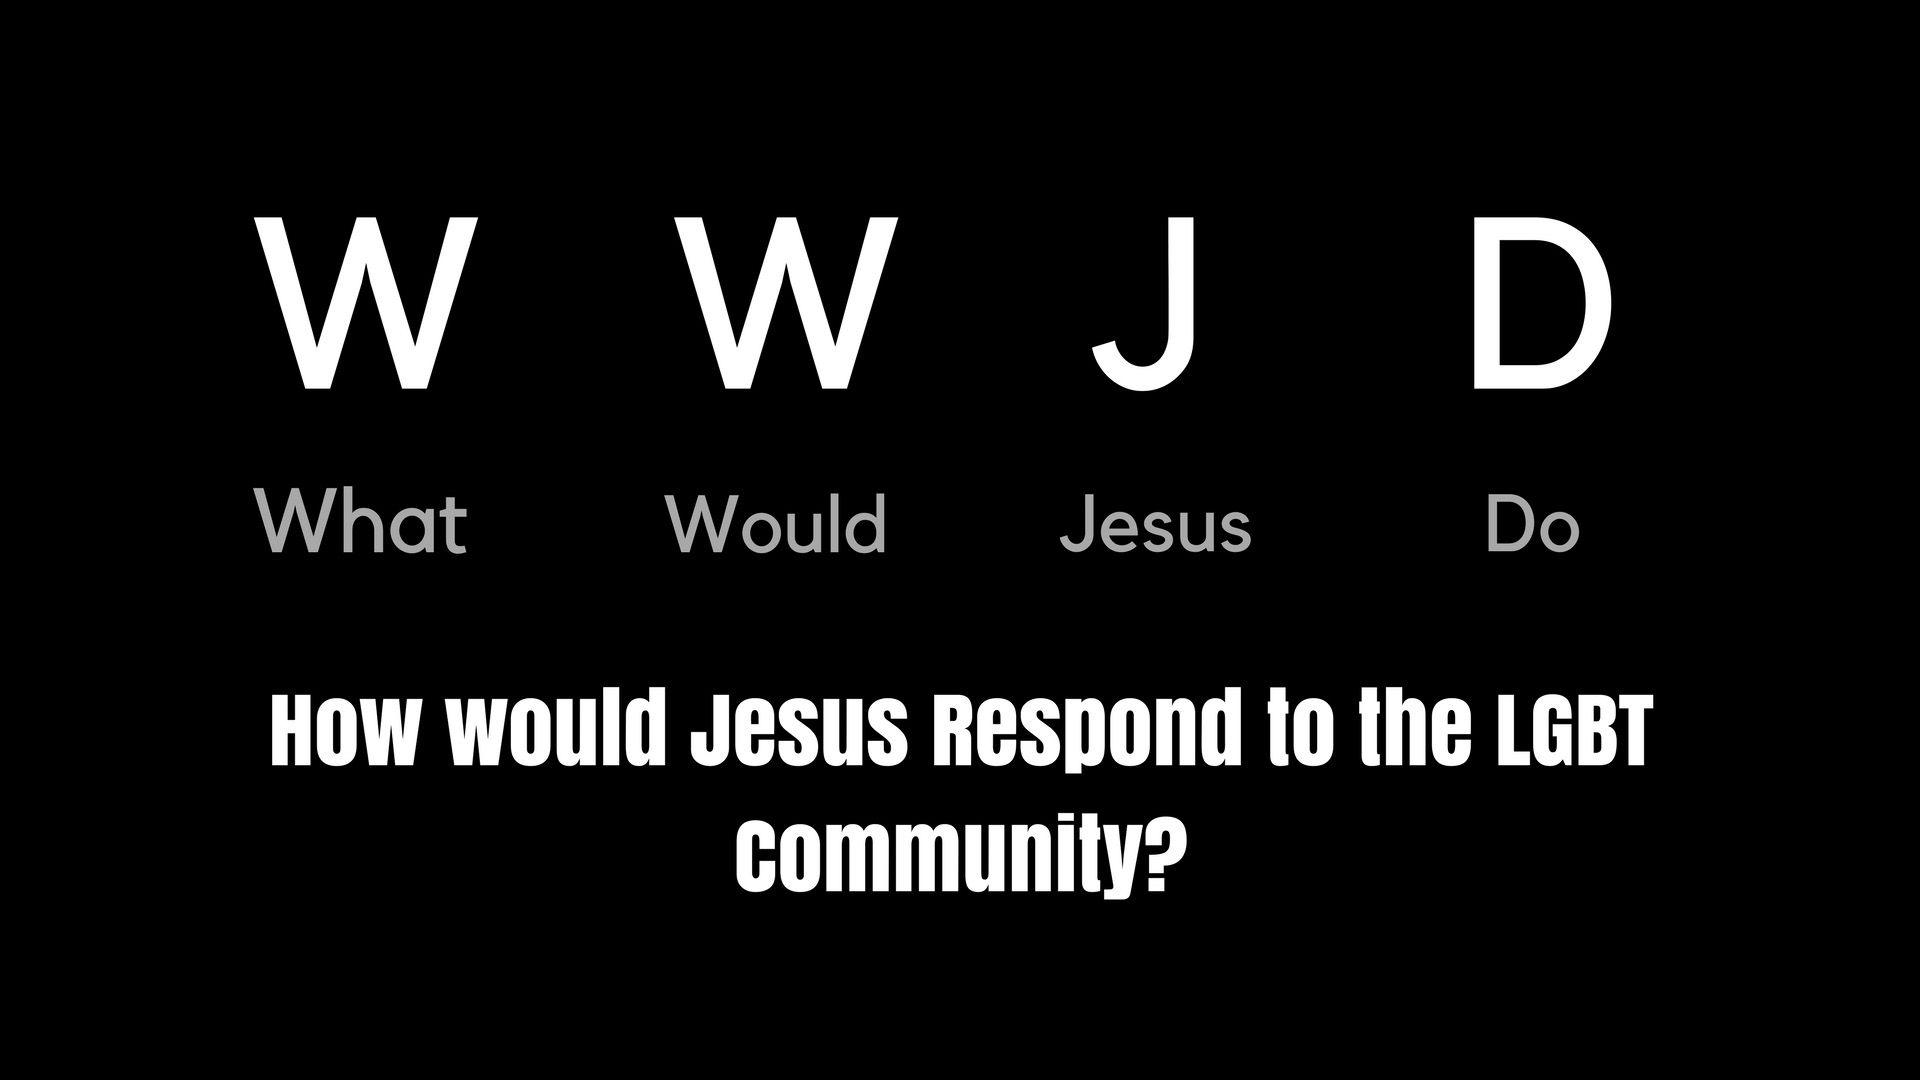 WWJD: How Would Jesus Respond To The LGBT Community? 11 19 17